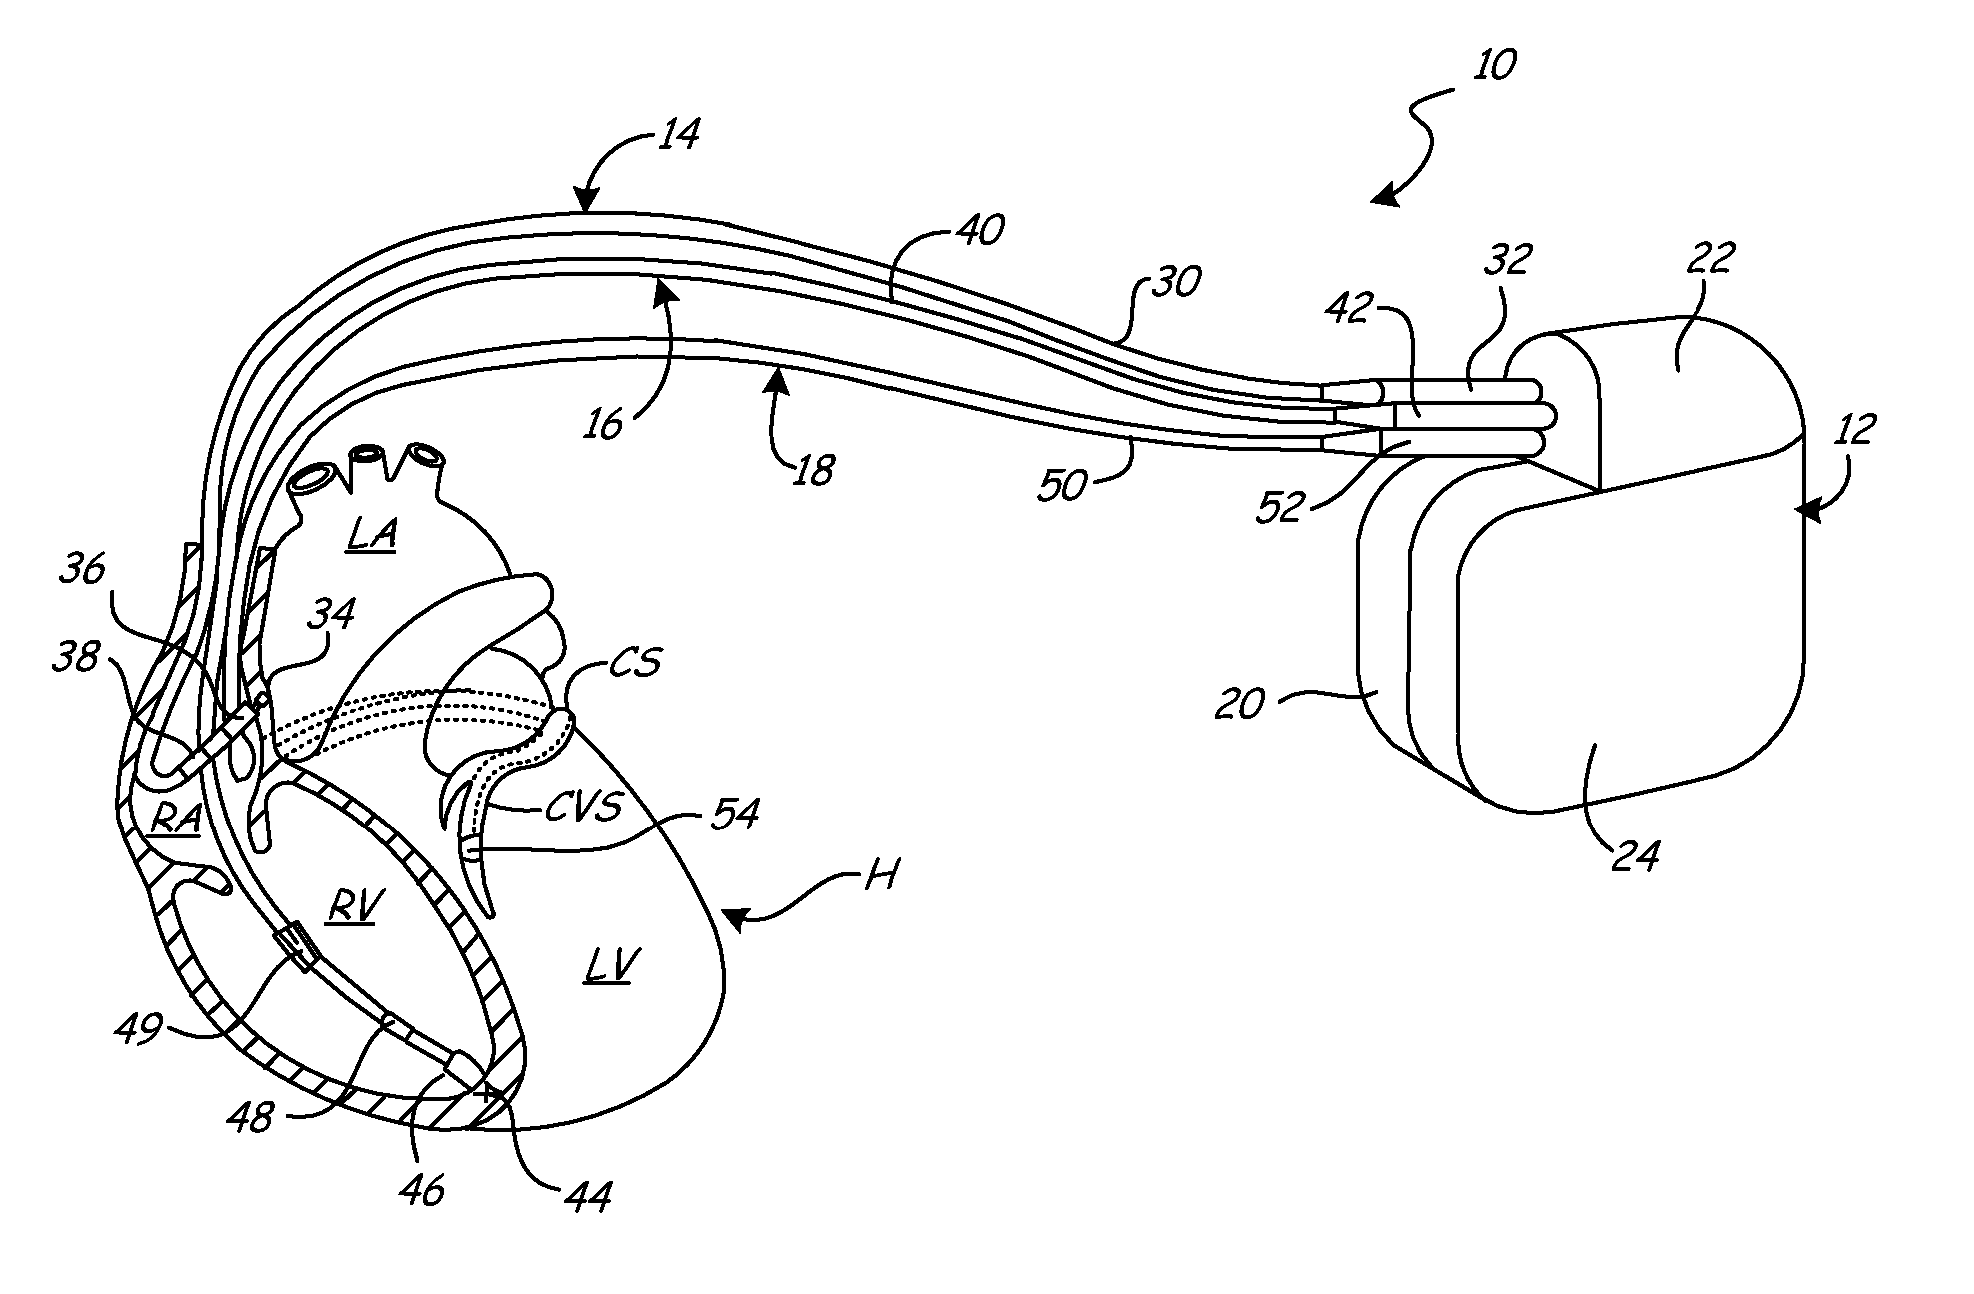 Implantable Medical Device with Electromechanical Delay Measurement for Lead Position and Ventricular